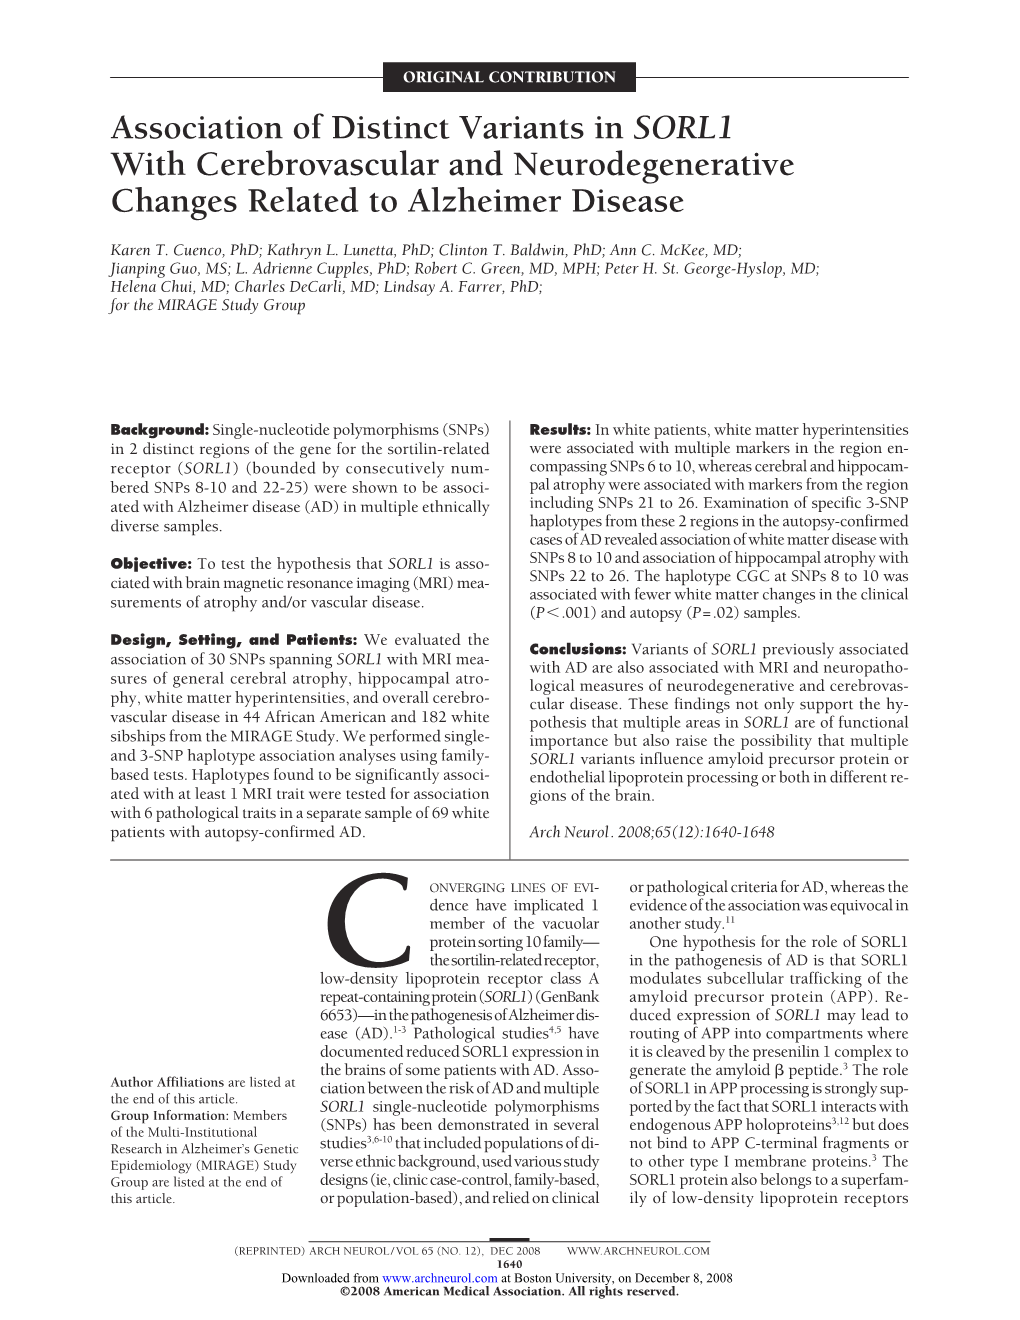 Association of Distinct Variants in SORL1 with Cerebrovascular and Neurodegenerative Changes Related to Alzheimer Disease